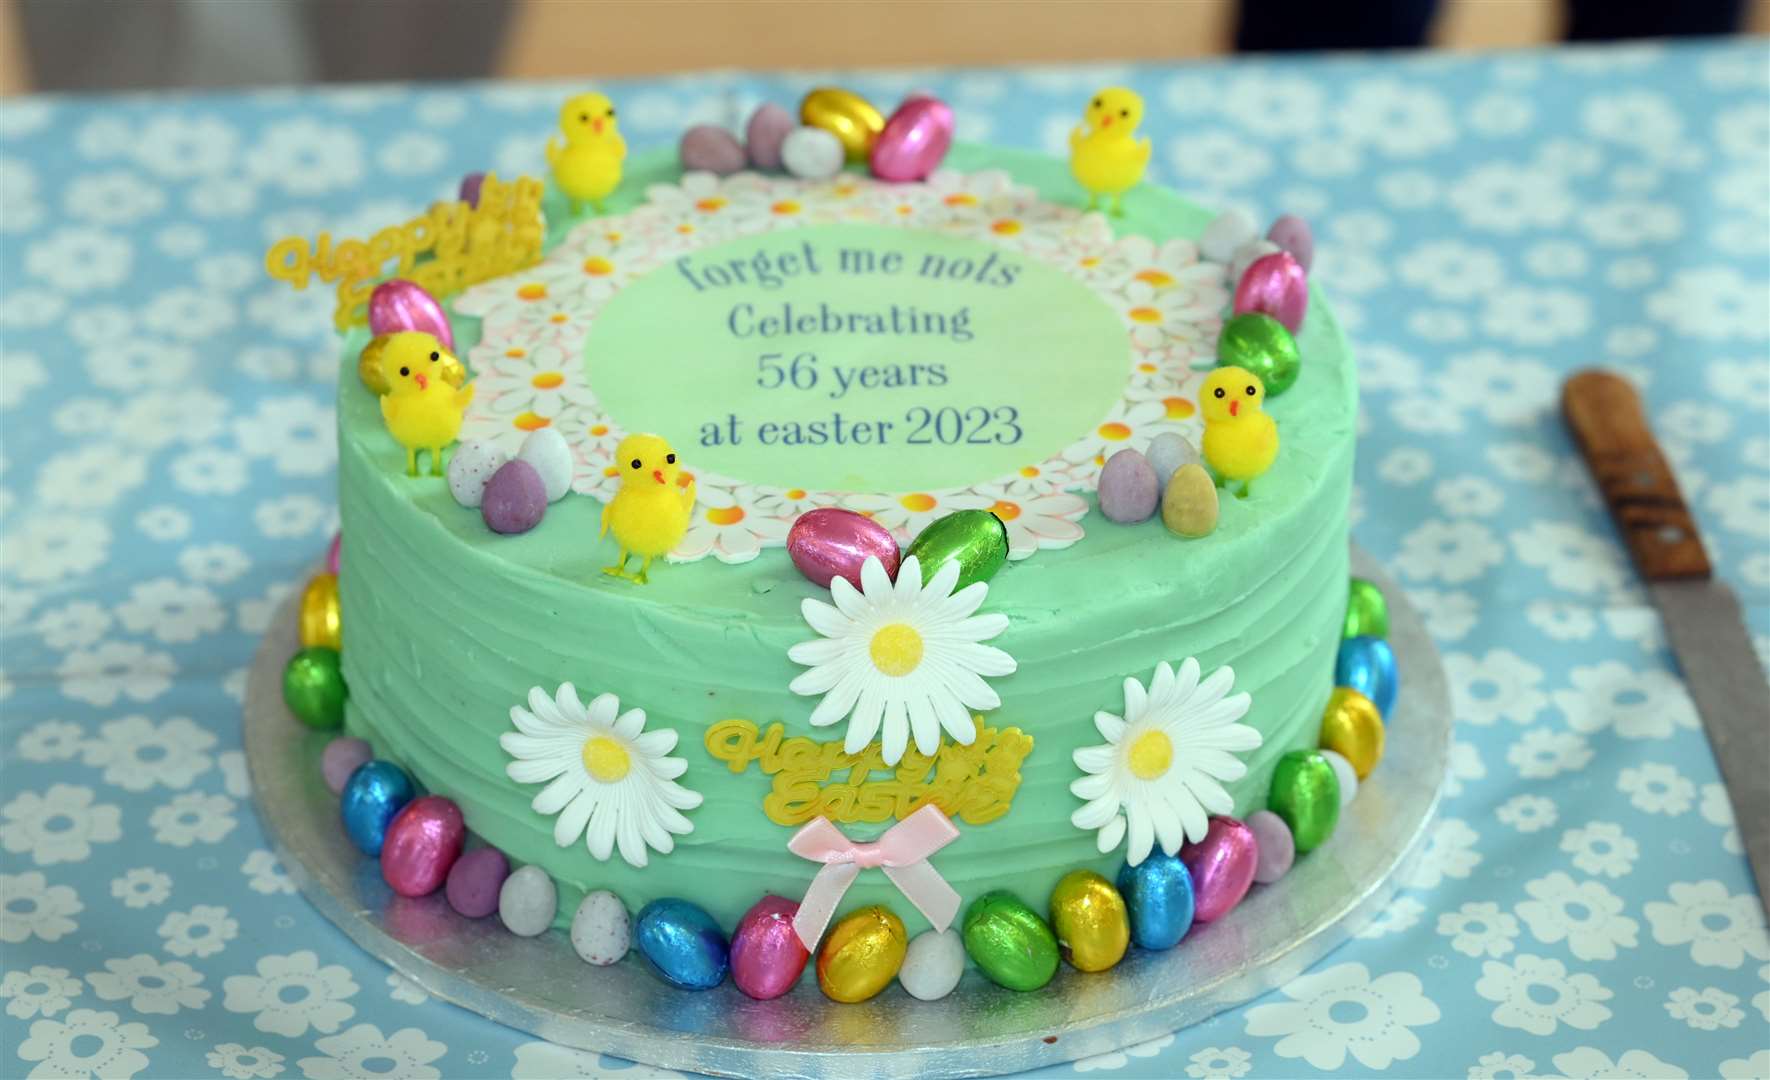 Forget-me-knot lunch club at Gaywood Church Rooms celebrating 56th birthday. (63273667)